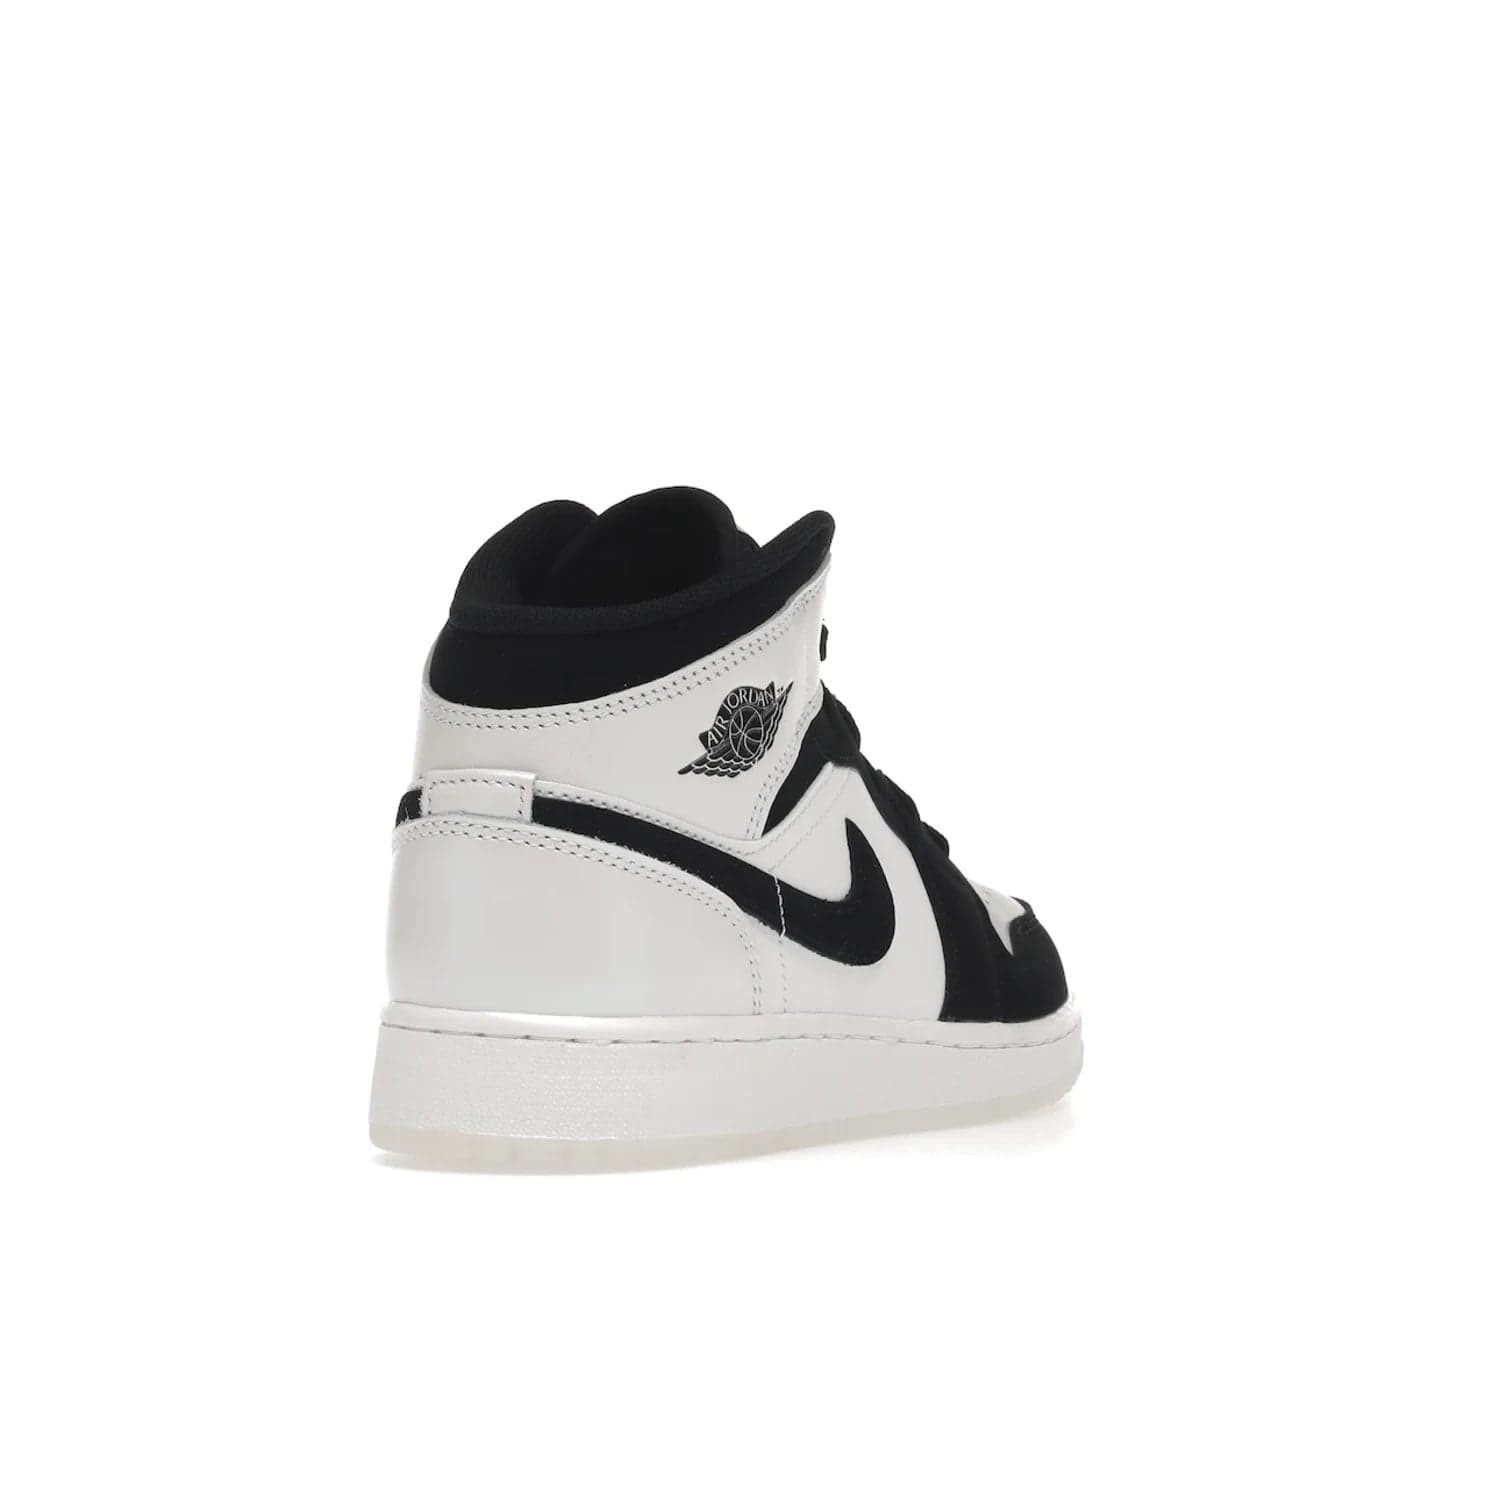 Jordan 1 Mid Diamond Shorts (GS) - Image 31 - Only at www.BallersClubKickz.com - Get the Jordan 1 Mid Diamond Shorts GS on 9th Feb 2022! Features a white, black & suede design with nylon tongue, stamped wings logo, rubber midsole & outsole. Only $100!